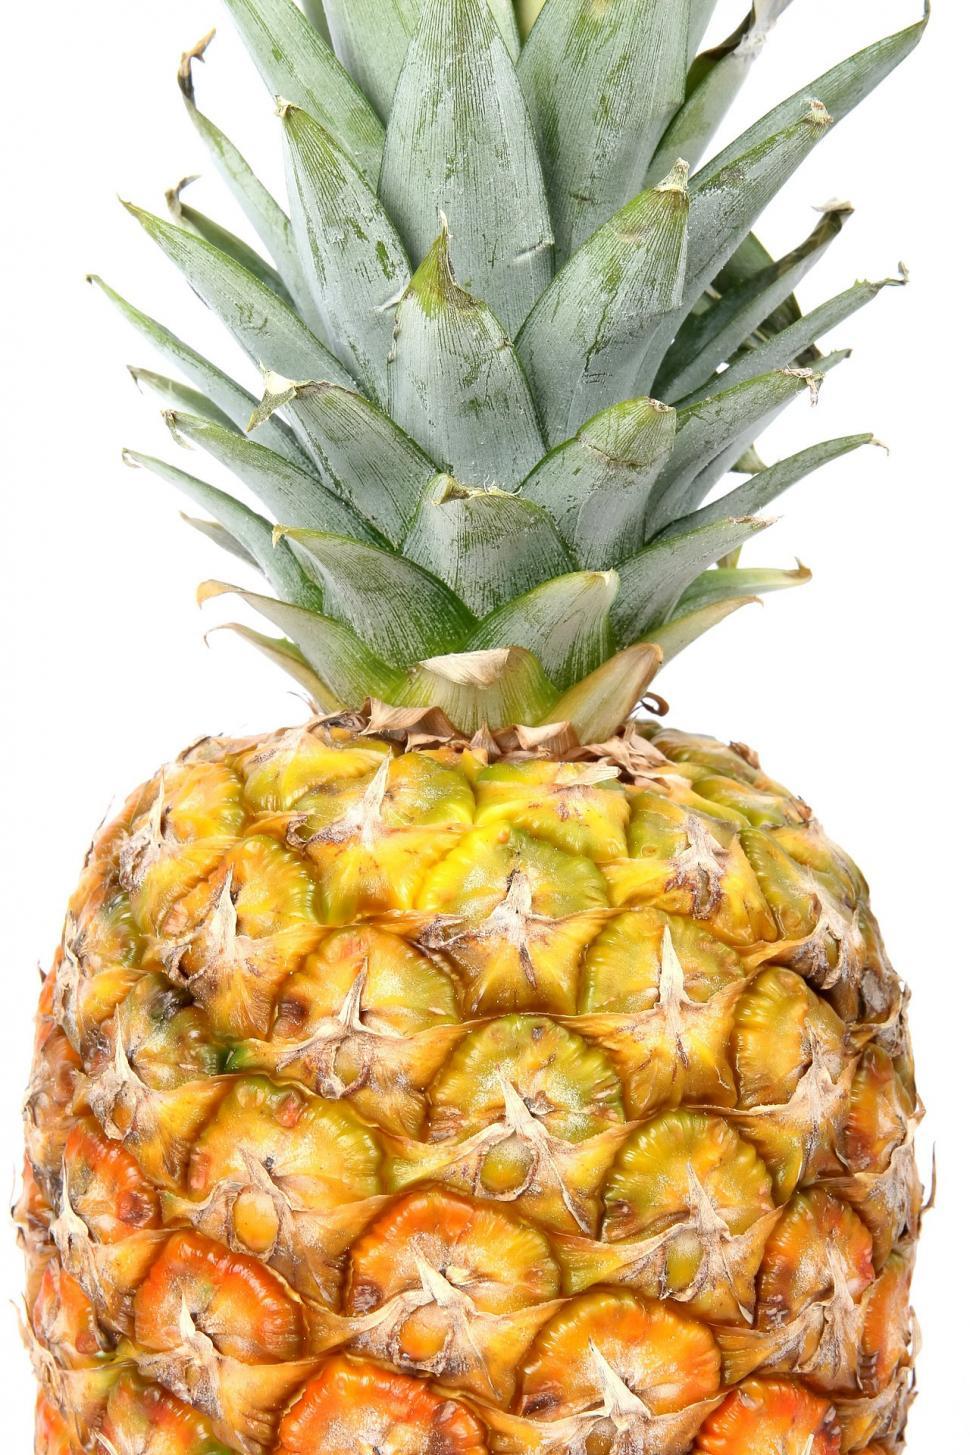 Free Image of Close Up of a Pineapple on a White Background 